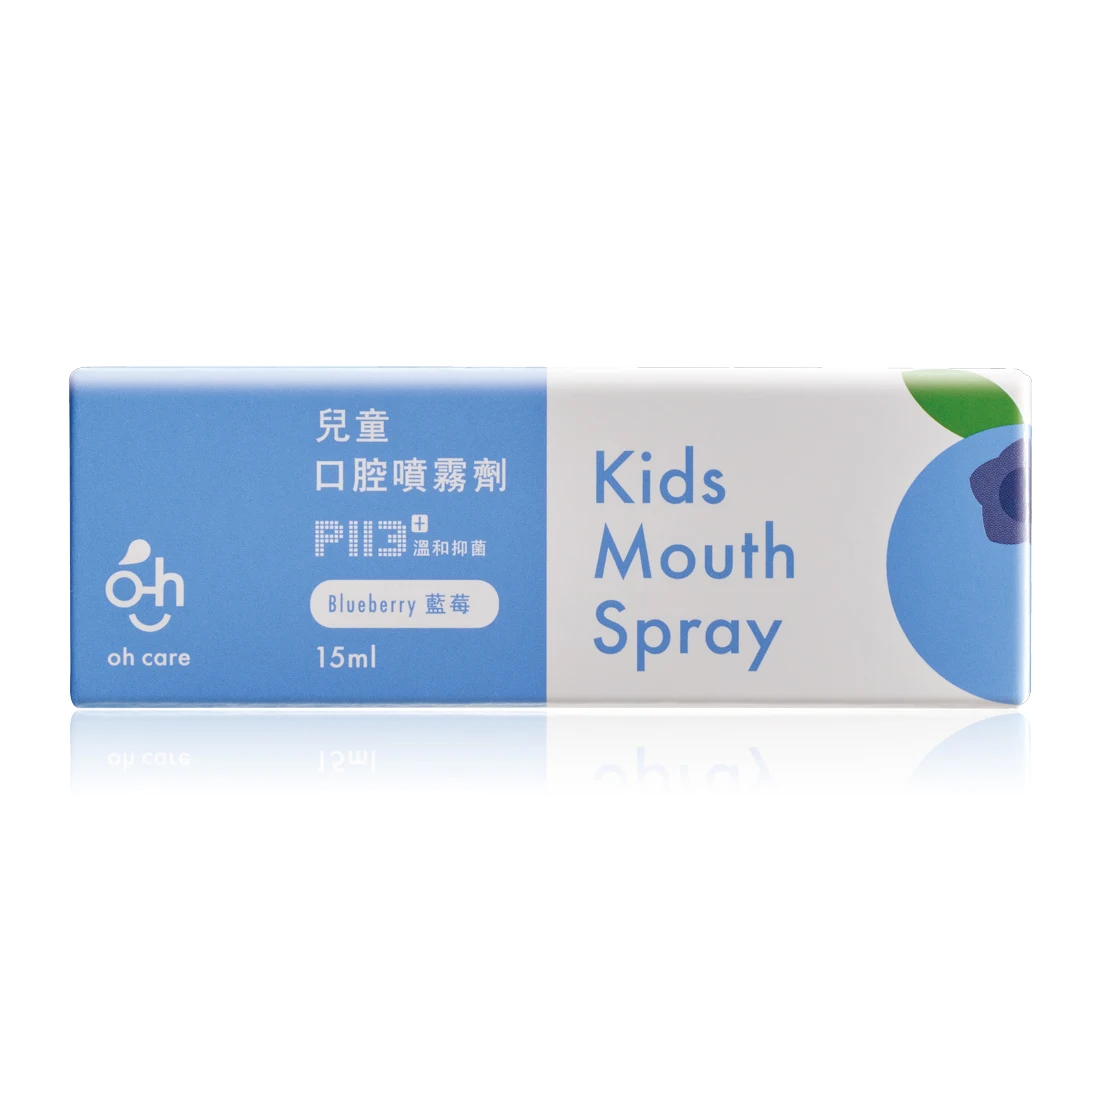 
High Quality Mouthwash Blueberry Taste Portable Mouth Spray for Kids Mouth Odor  (1600150146578)